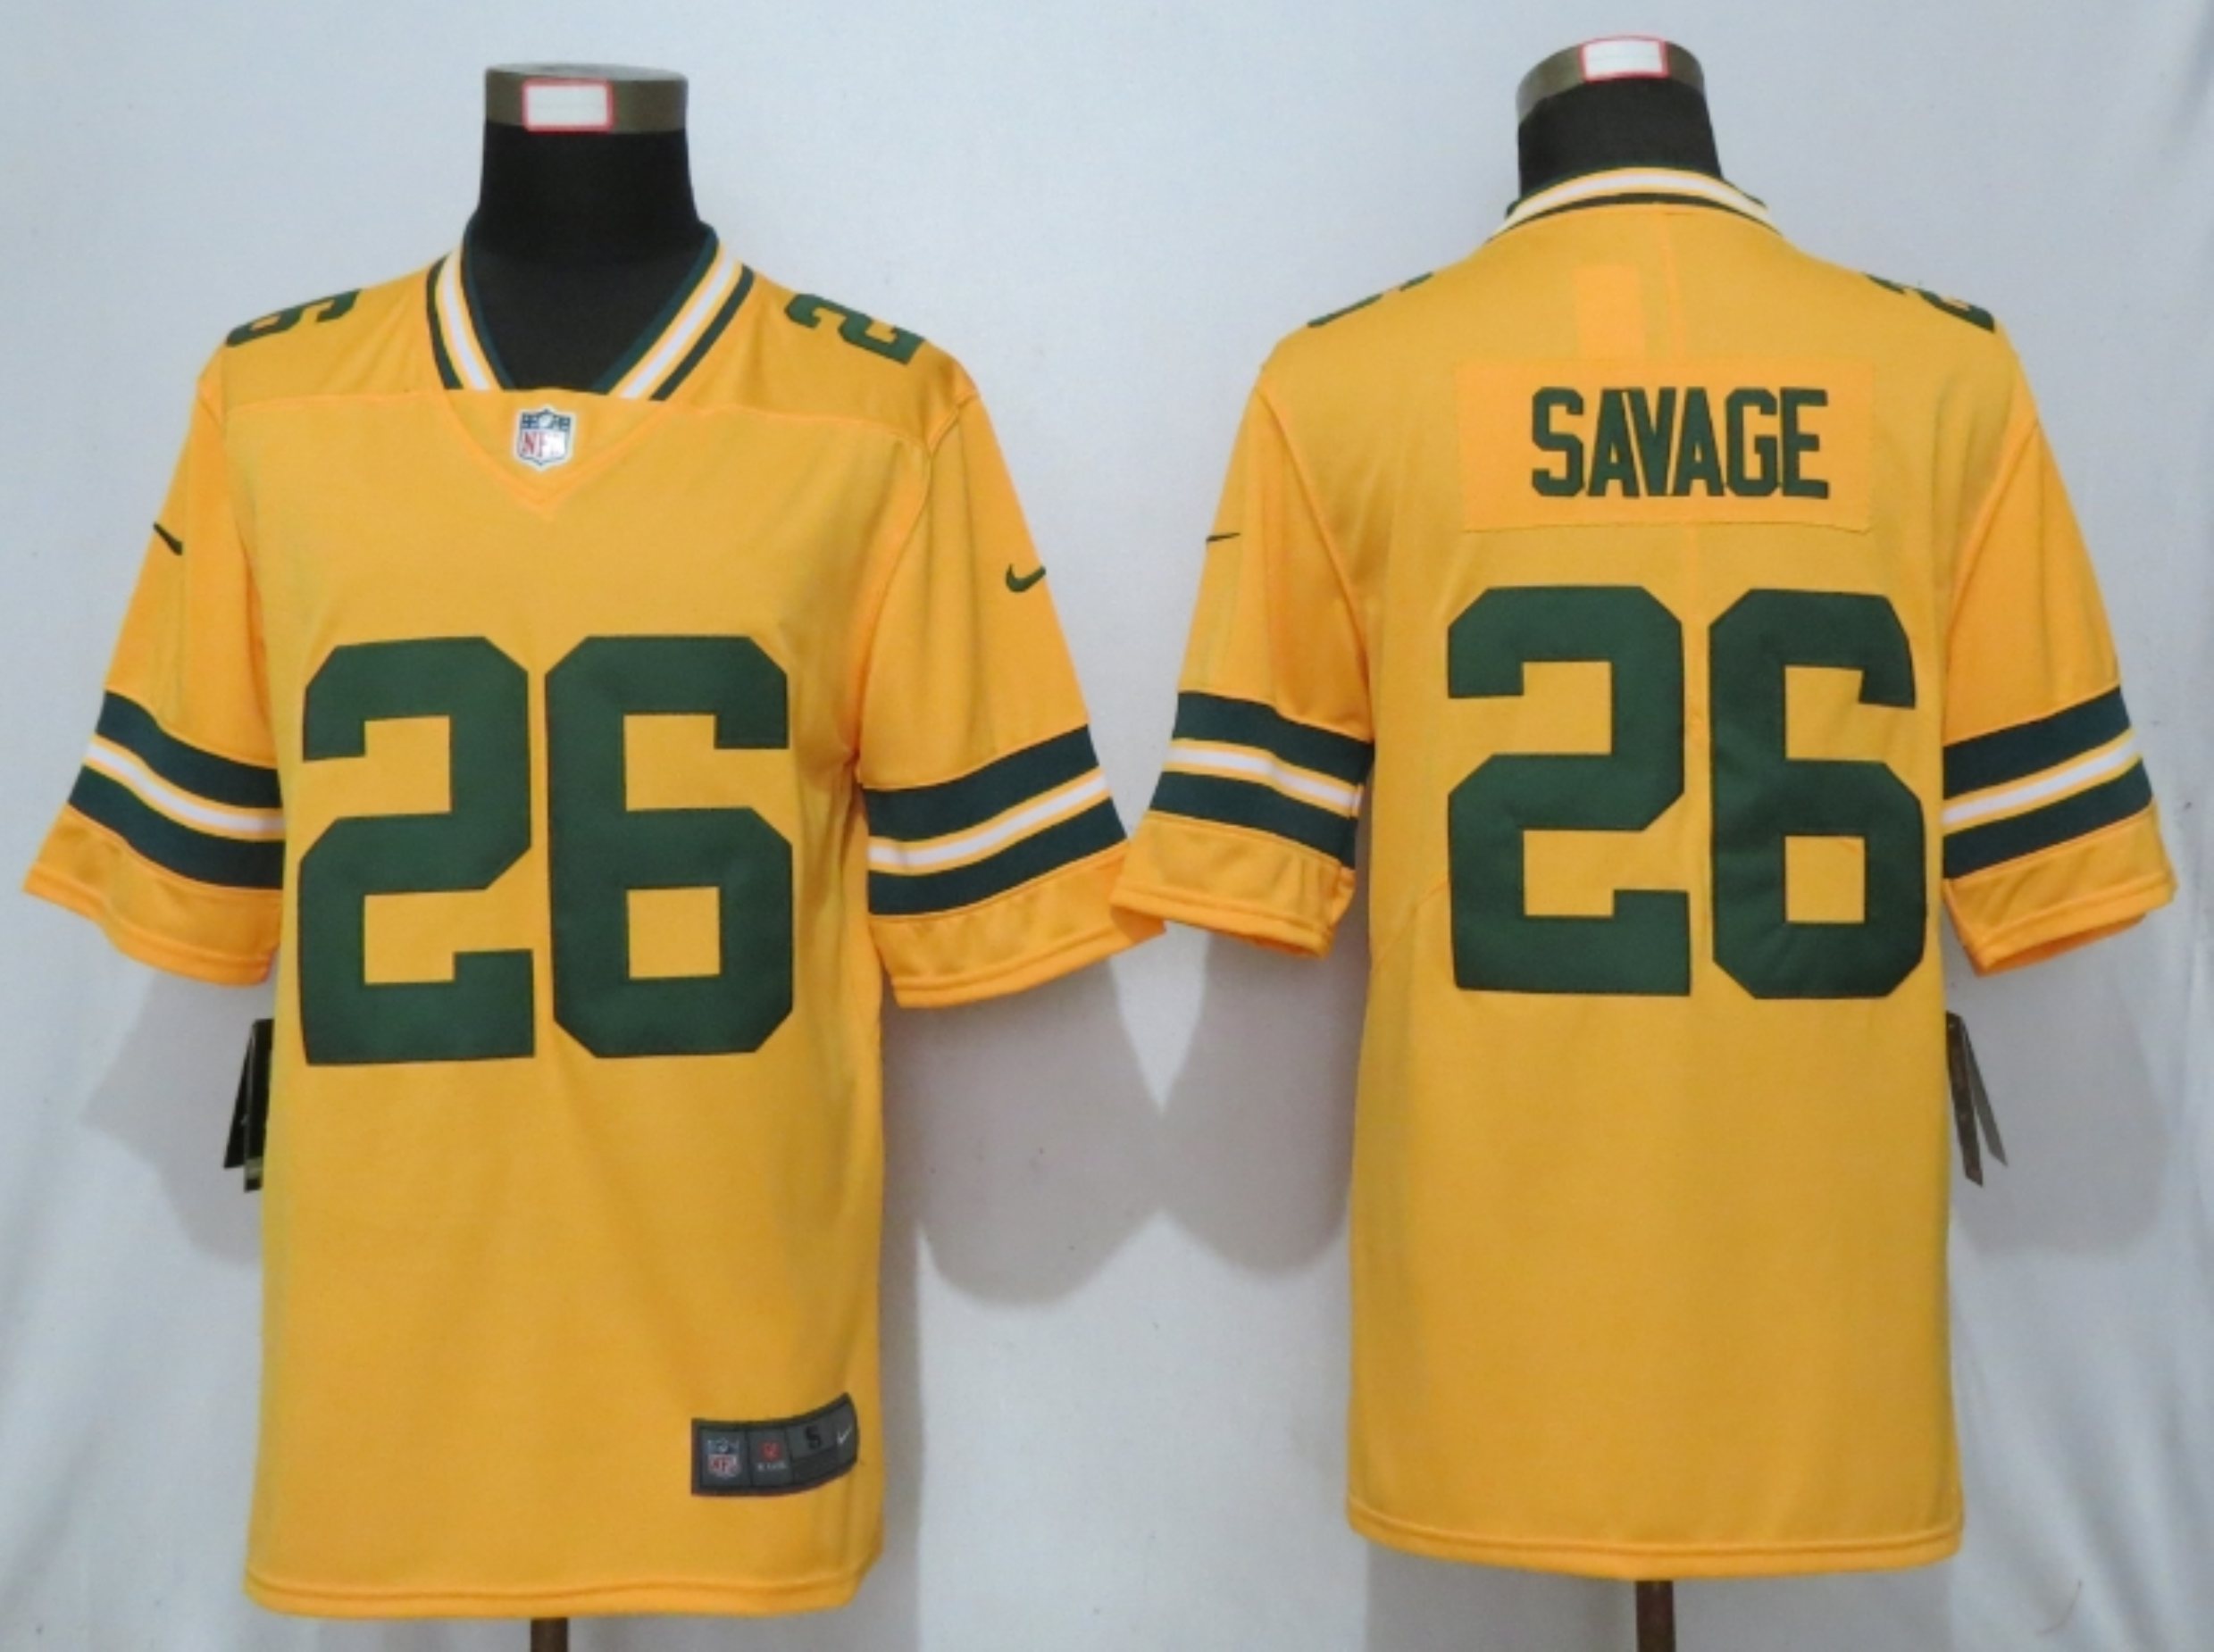 New Green Bay Packers #26 Savage Vapor Nike Gold Inverted Legend Jersey